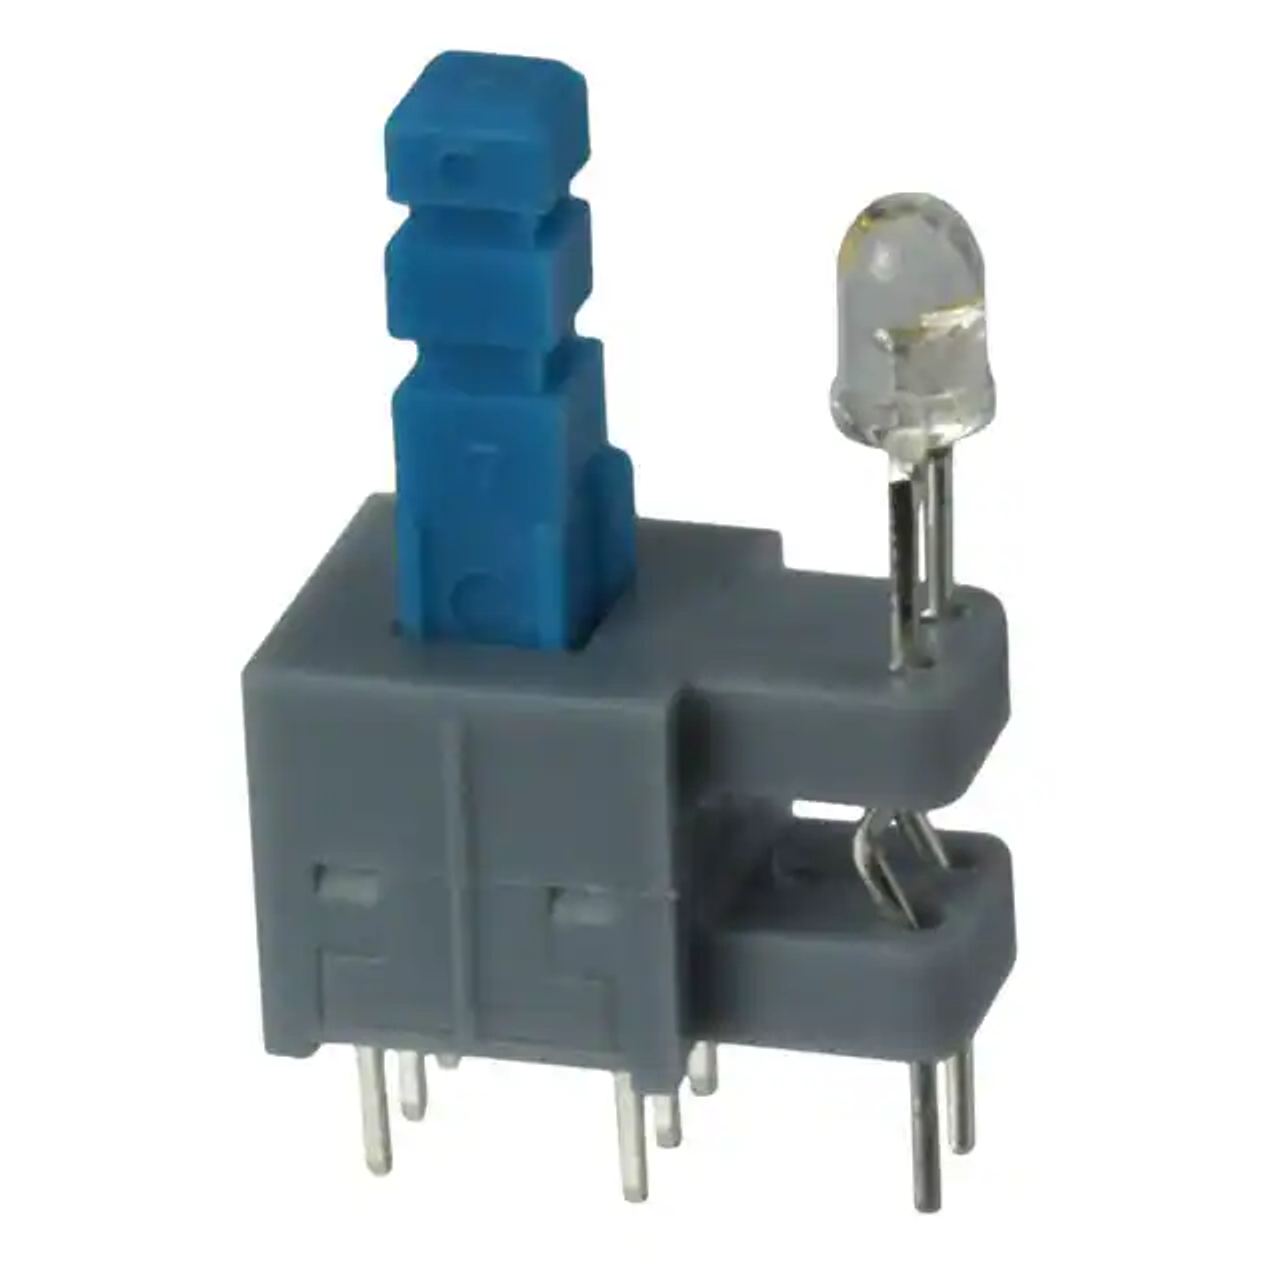 E-Switch TL2205EECPBA Pushbutton Switches